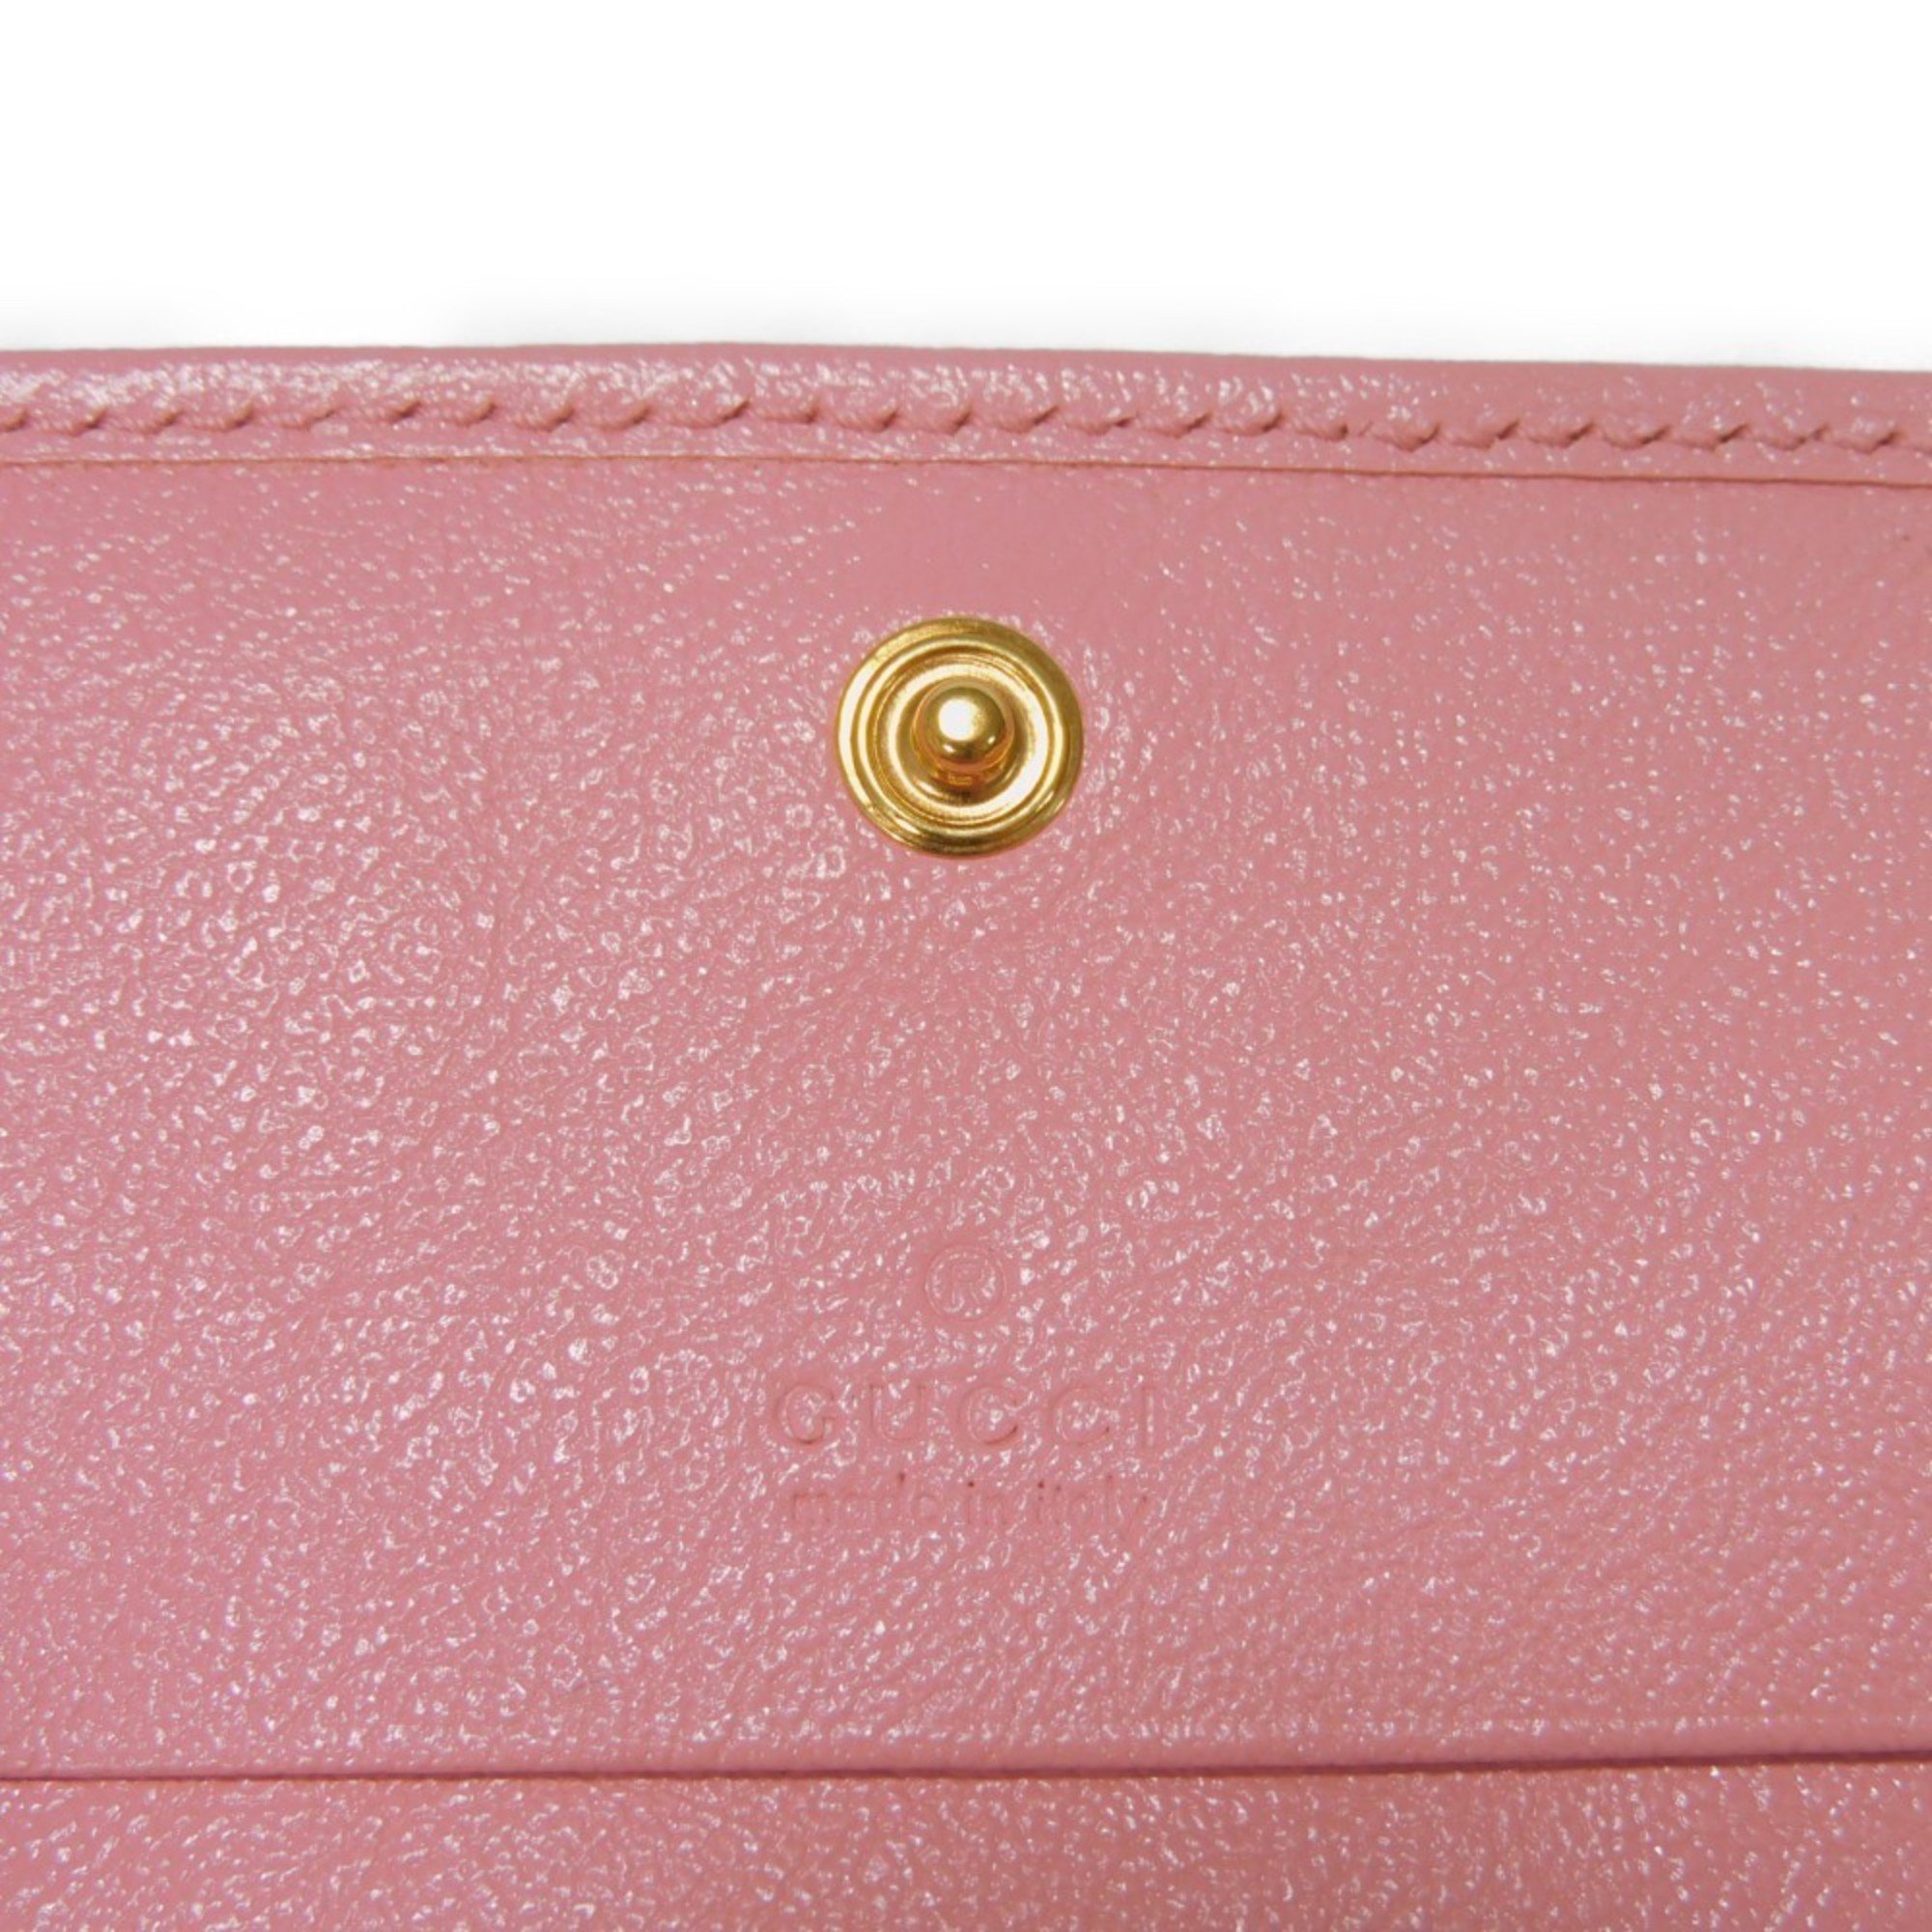 GUCCI Bifold Wallet Quilted Compact Red Pink Bicolor Enamel GG Marmont 573811 1X5EG 6476 Women's Bill Purse